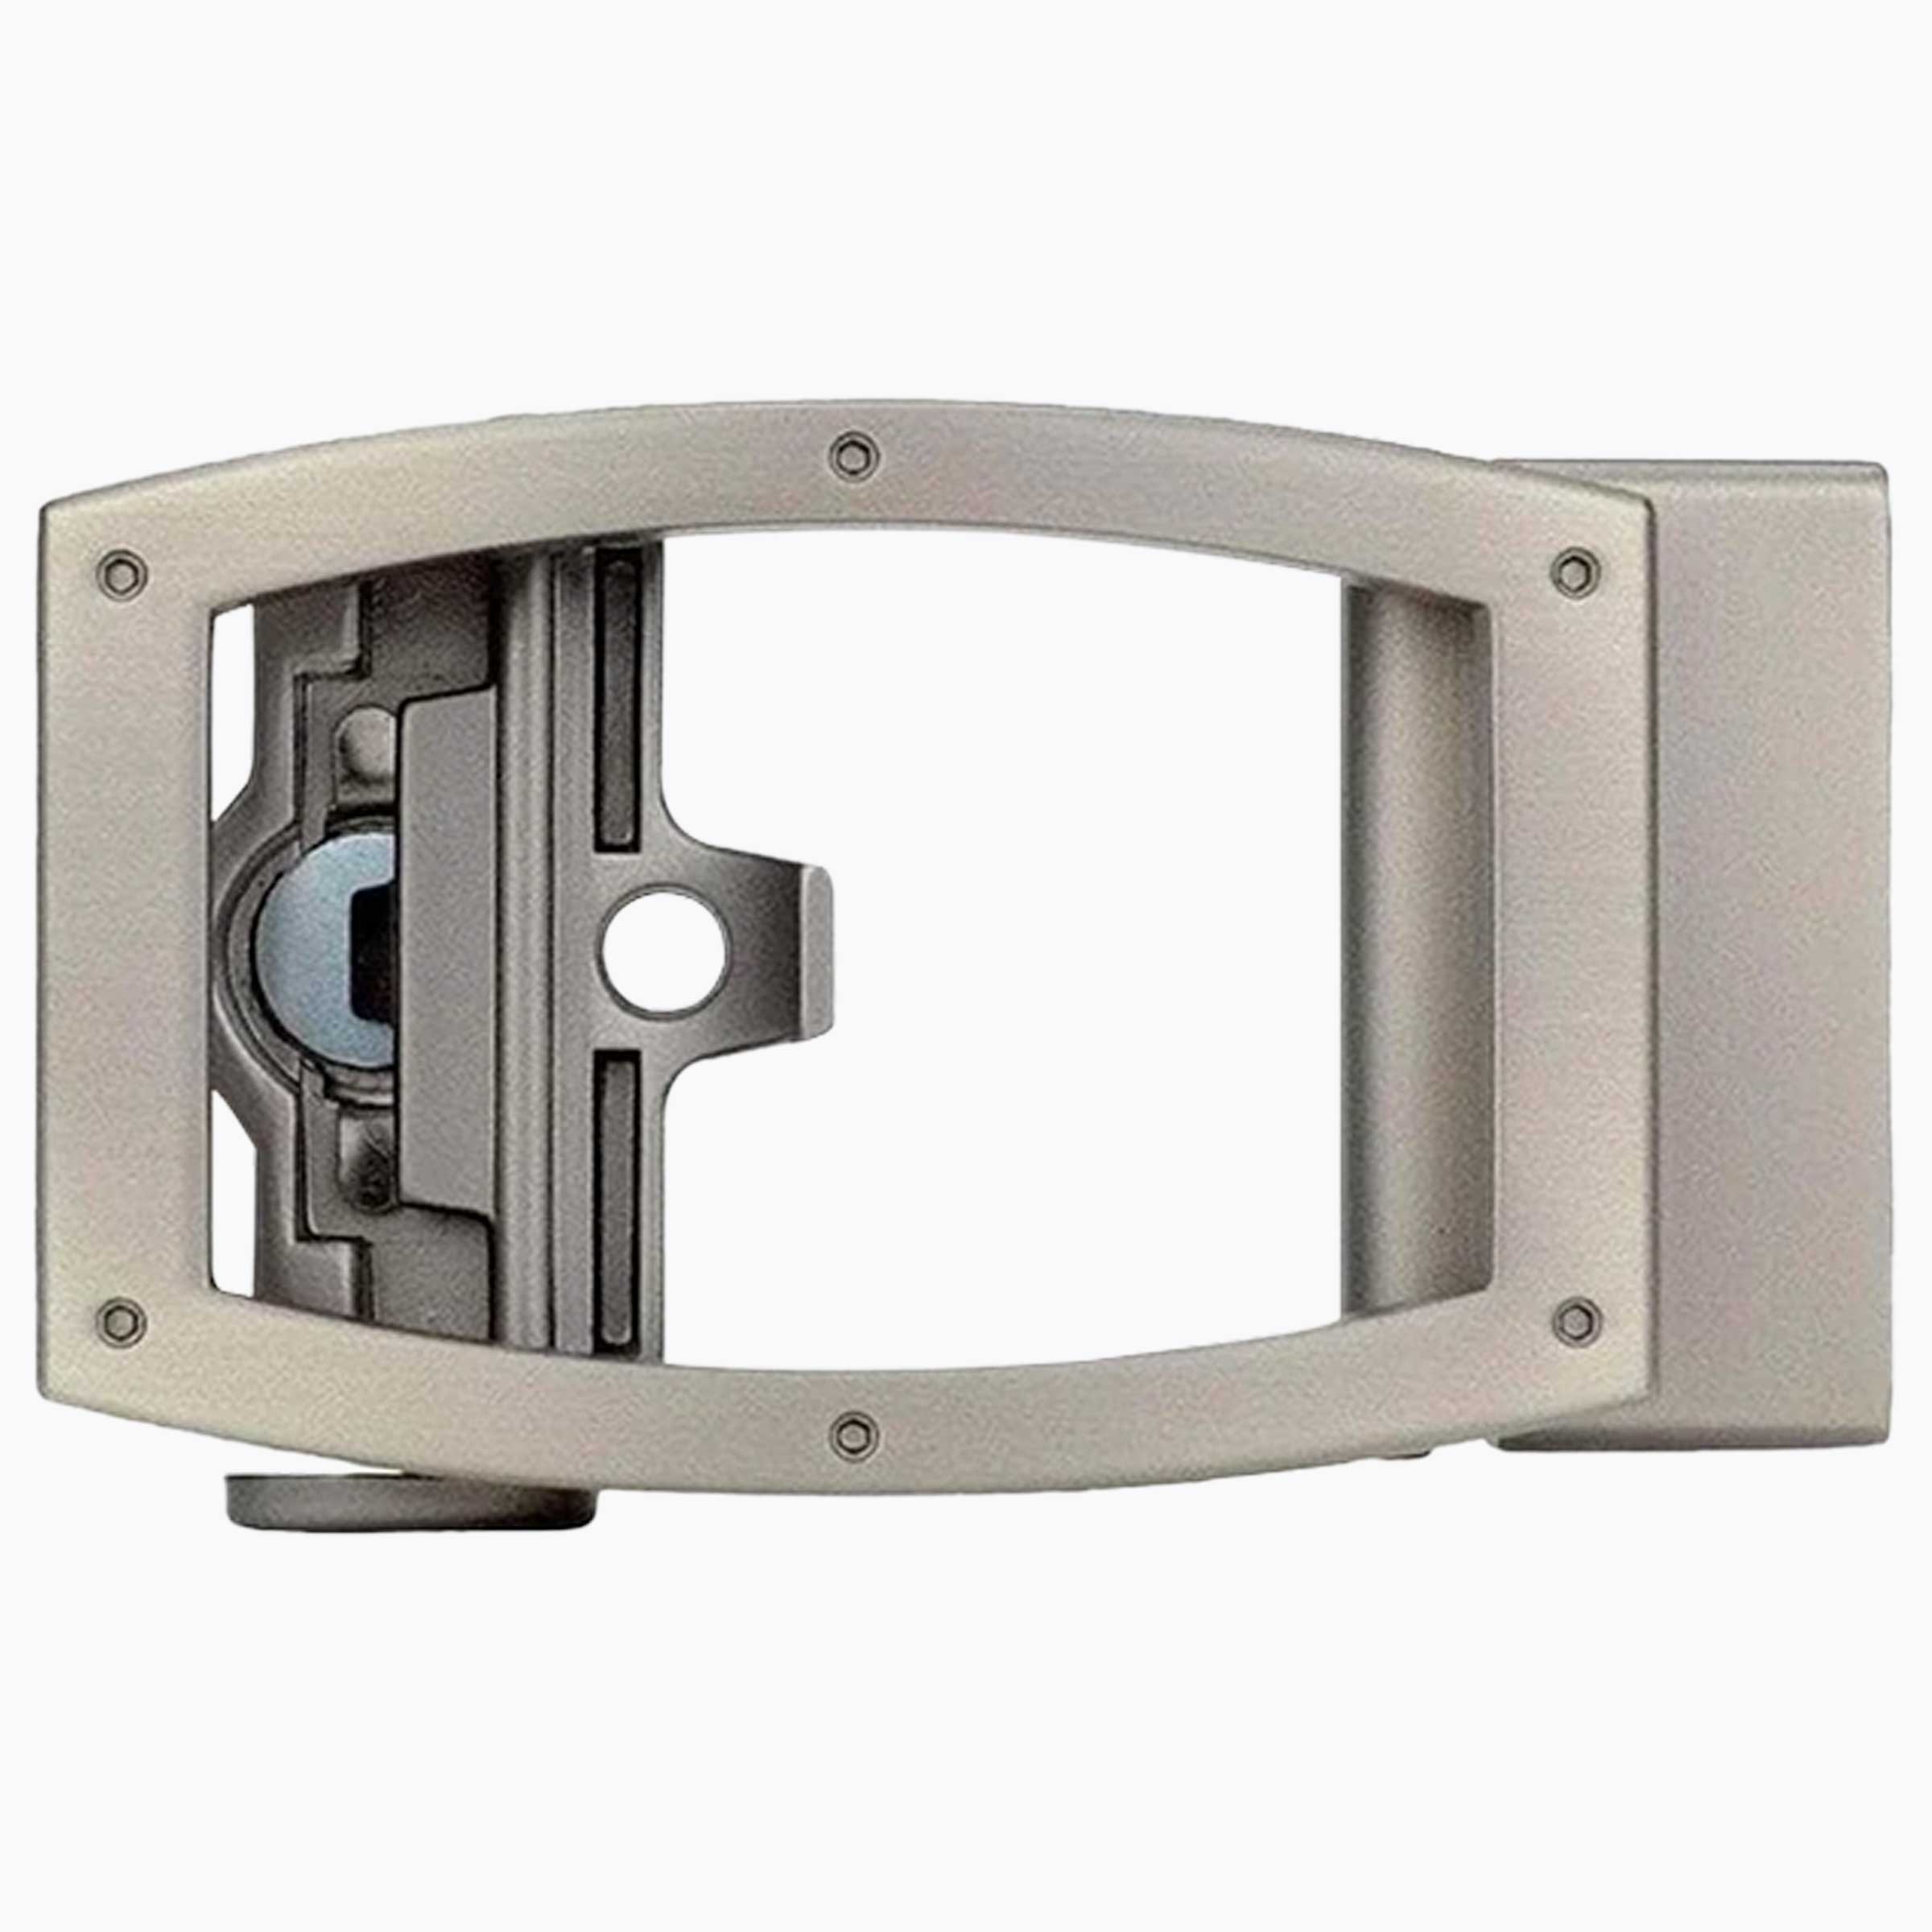 Apollo Pewter Dress Buckle, Fits 1 3/8" Straps [35mm]